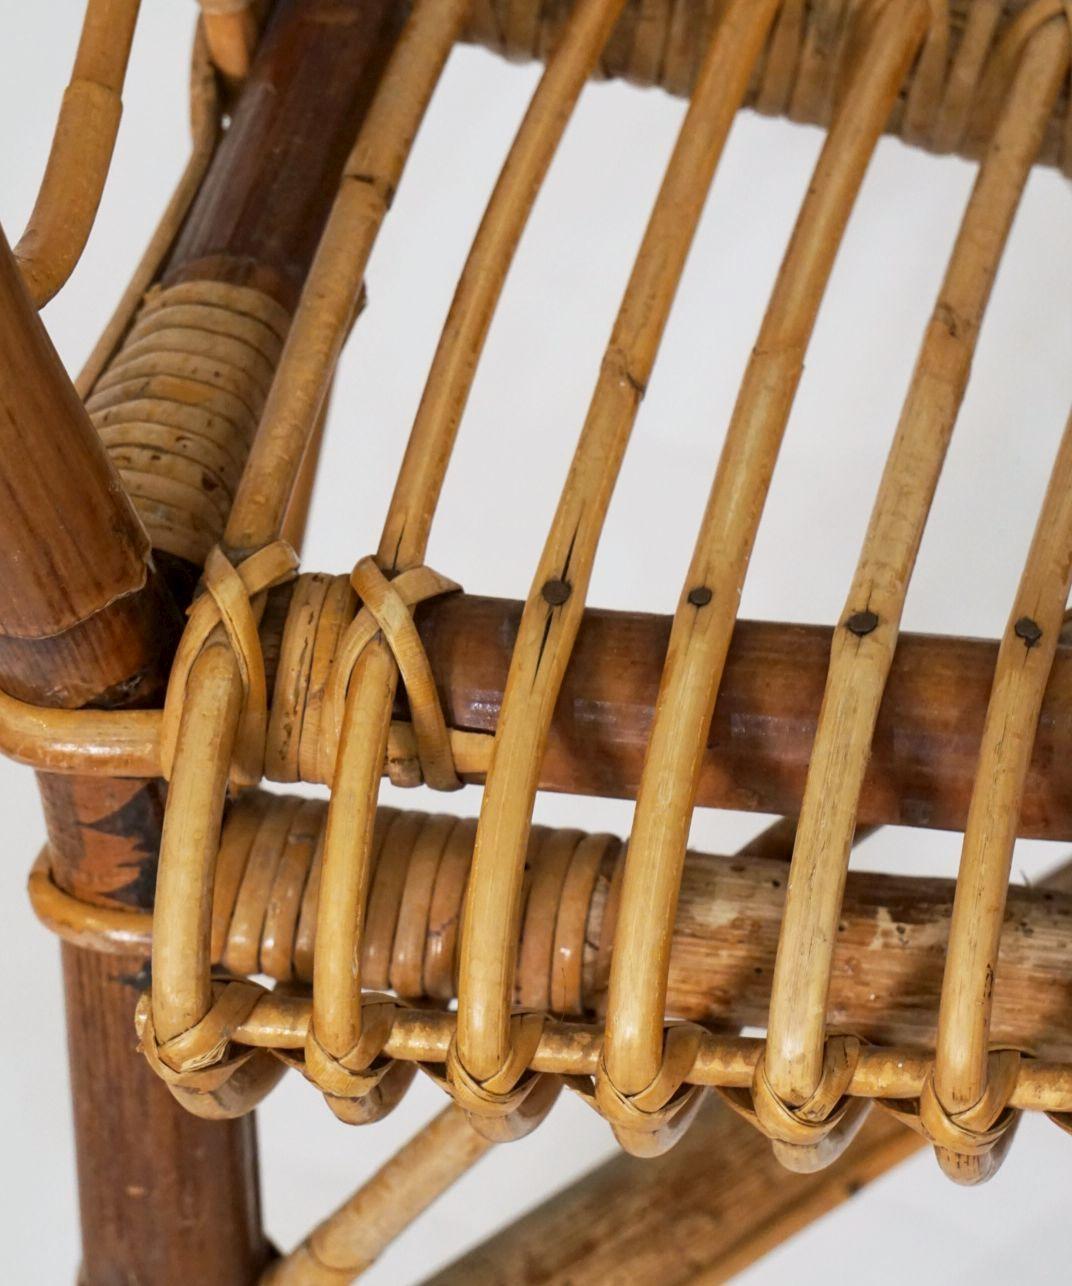 Italian Fan-Backed Arm Chairs of Rattan and Bamboo from the Mid-20th Century For Sale 12